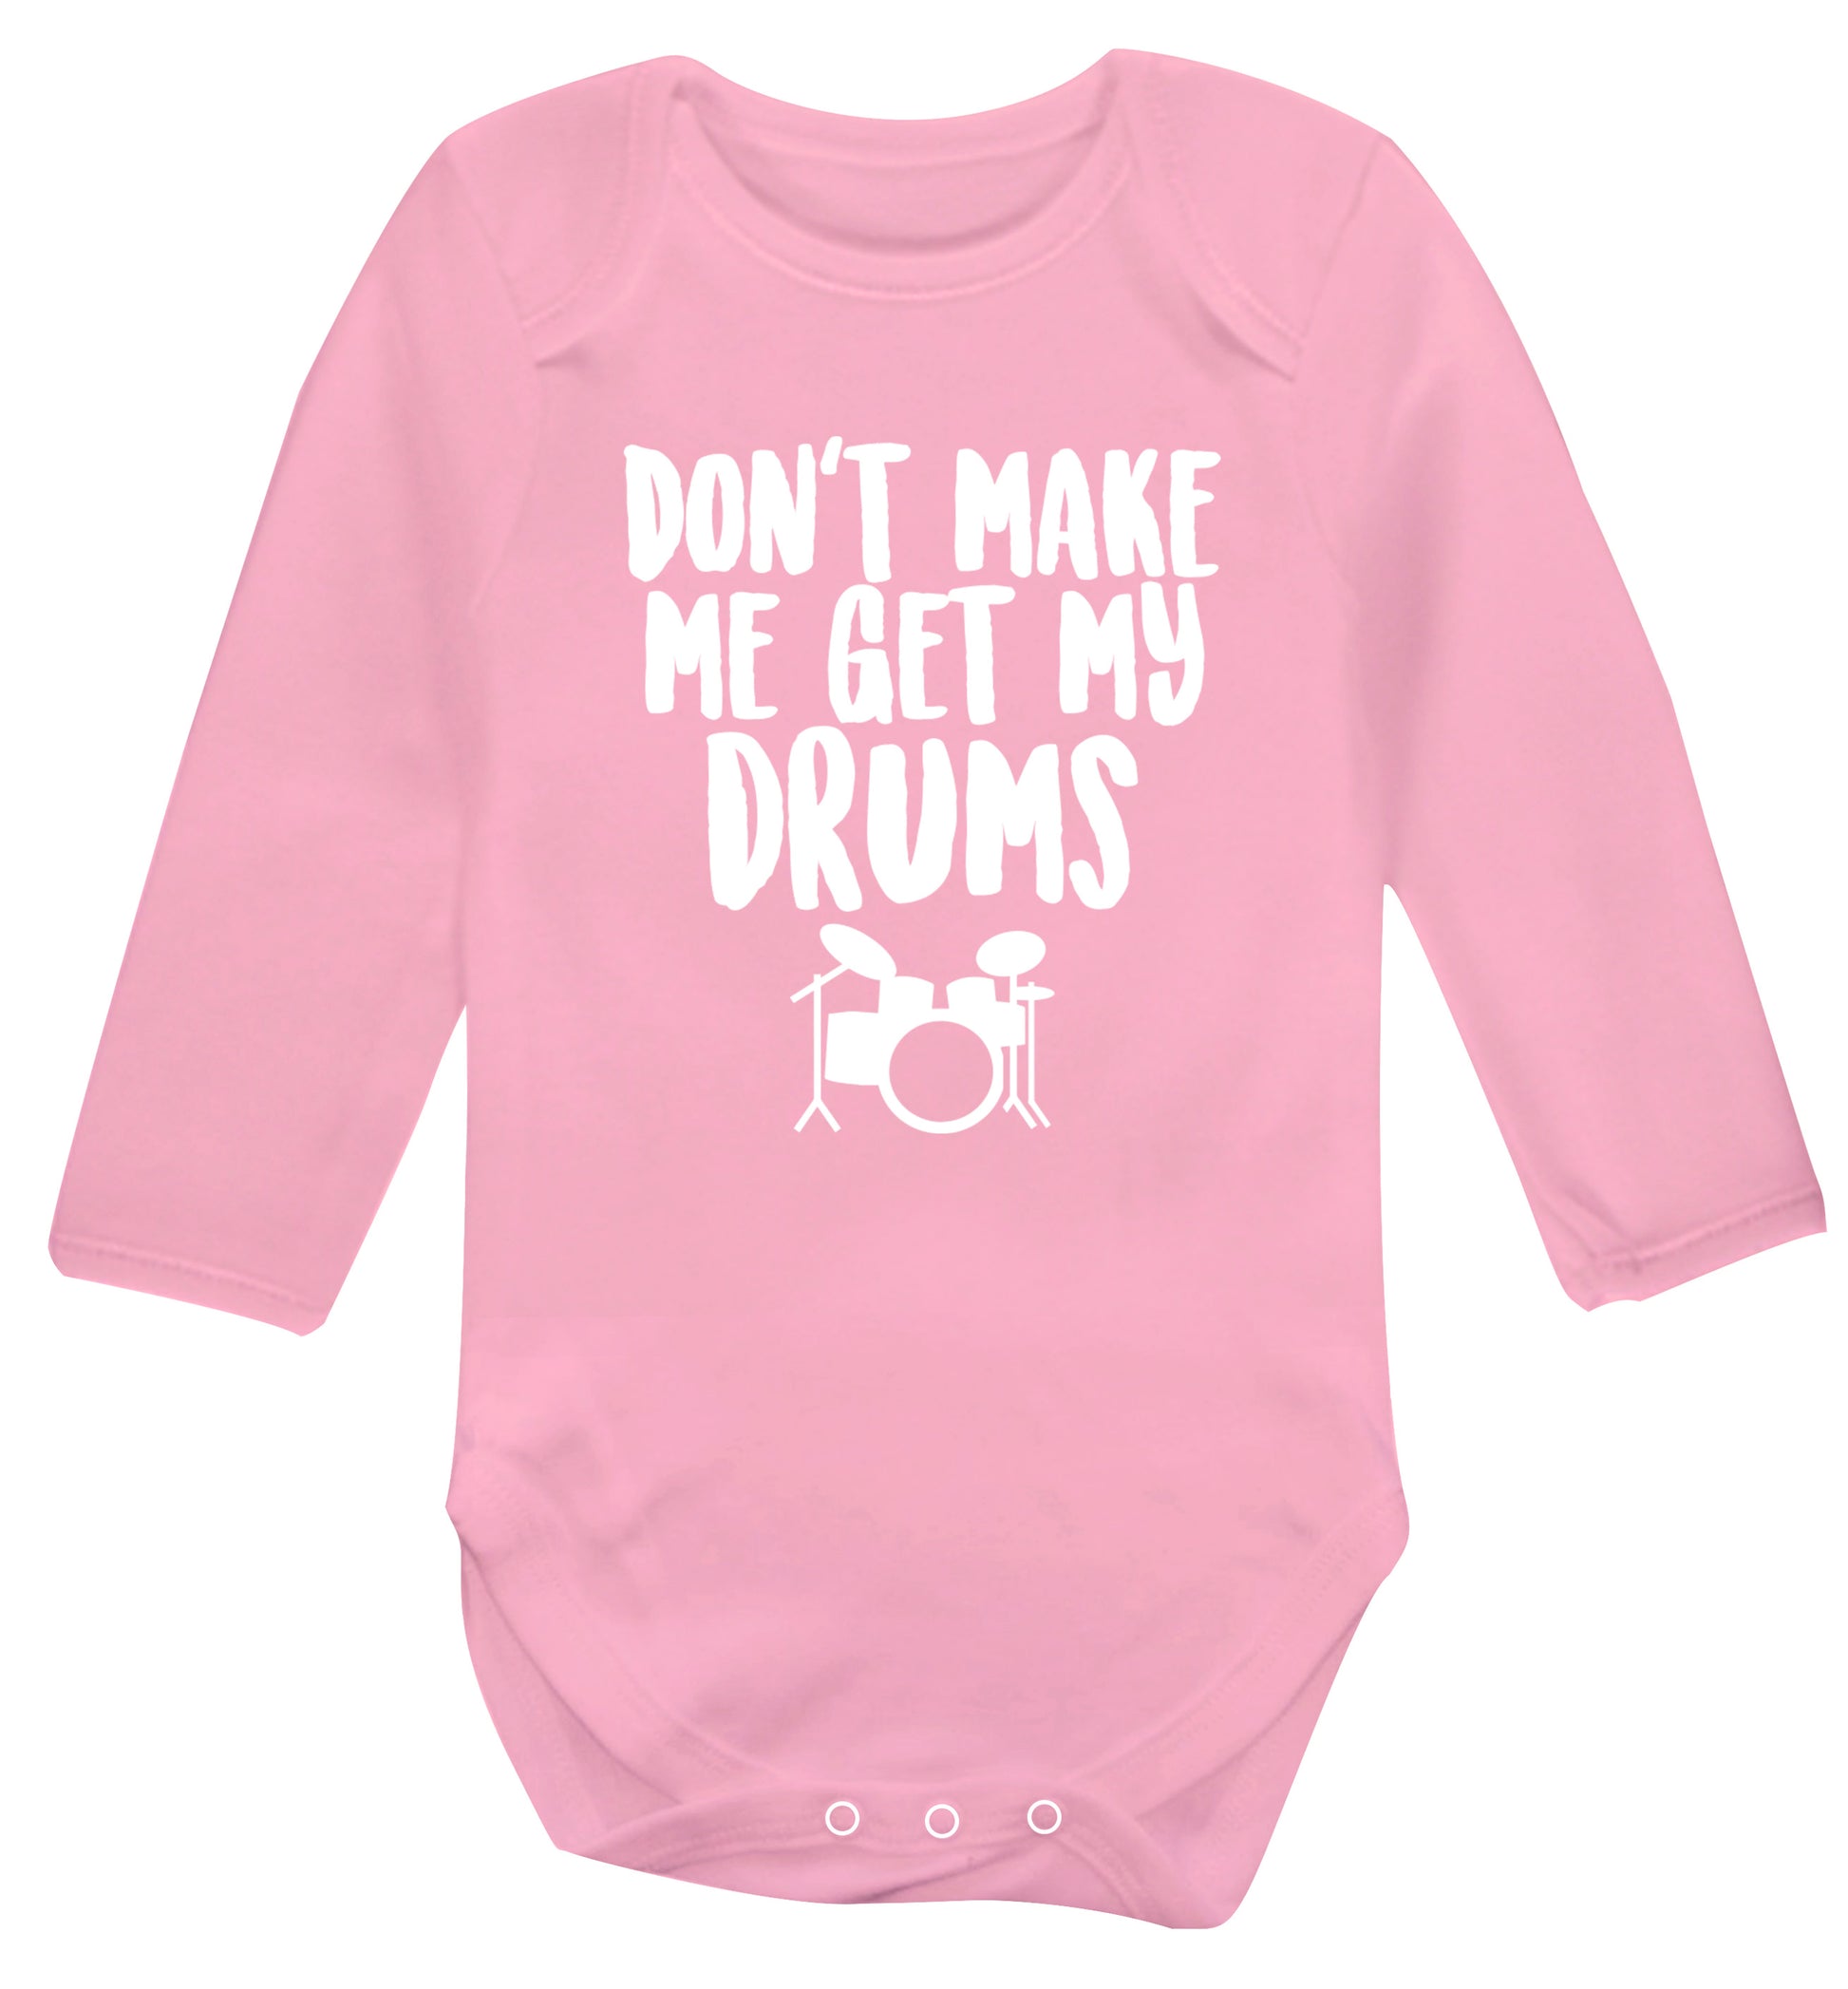 Don't make me get my drums Baby Vest long sleeved pale pink 6-12 months